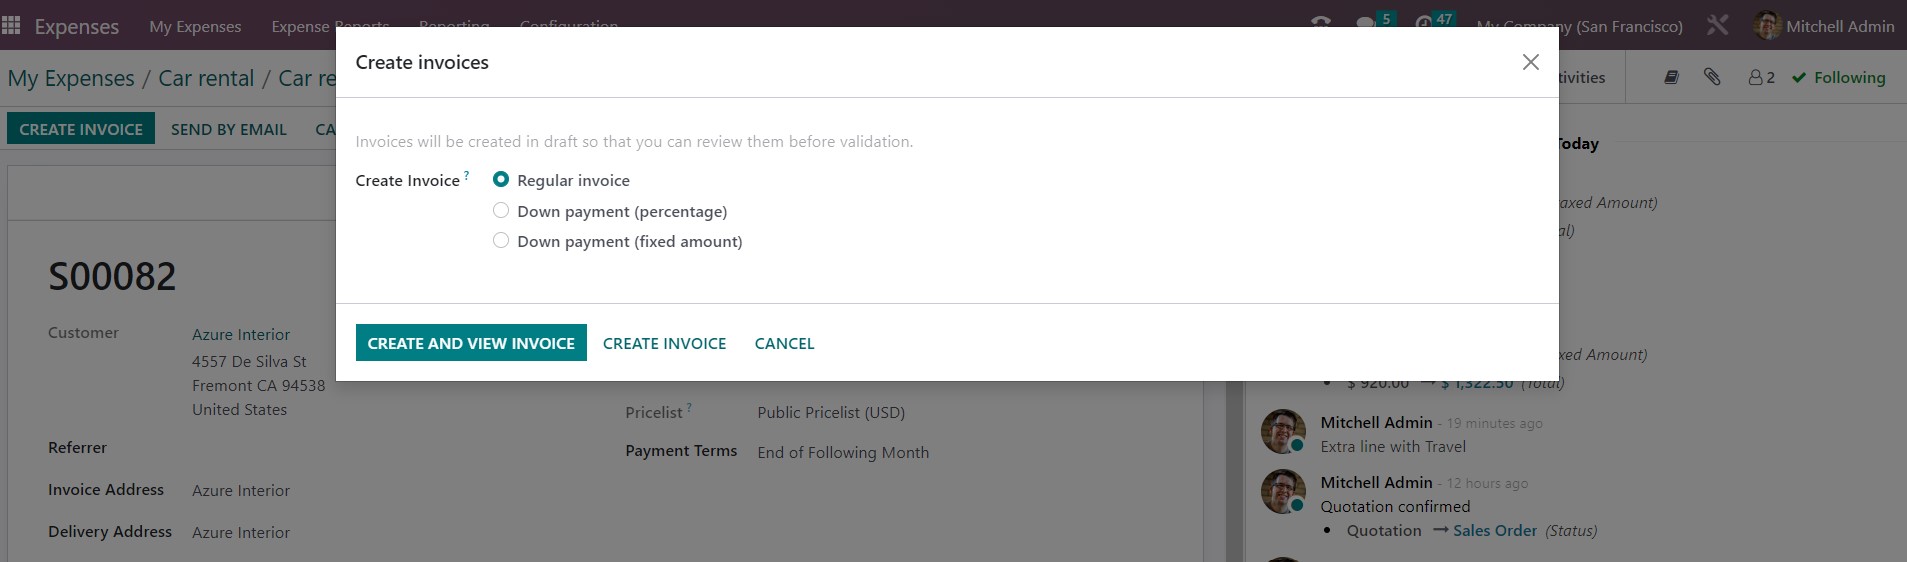 Reinvoicing Expenses To Customers in Odoo - 13 - Midis